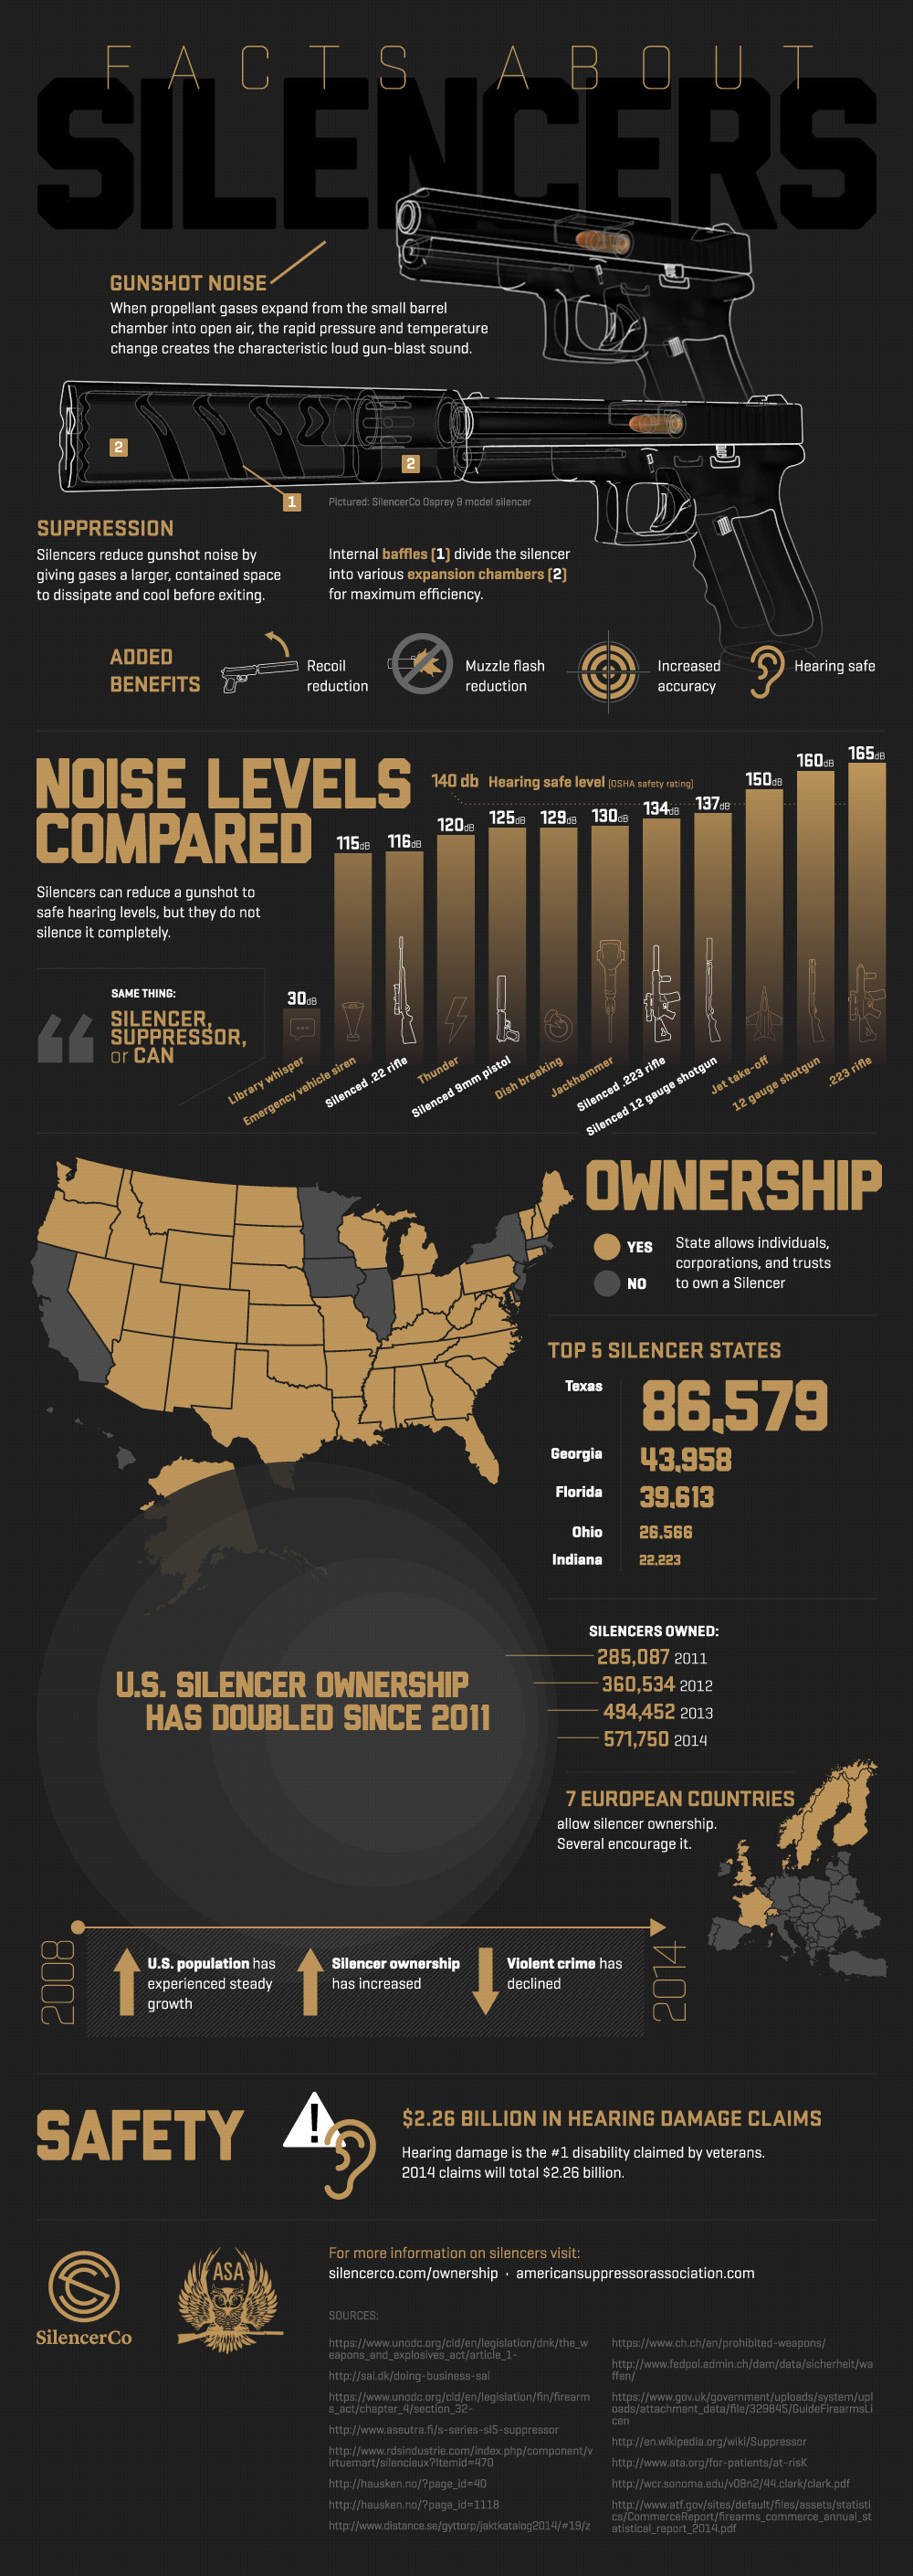 Note that several states have legalized suppressors since 2014